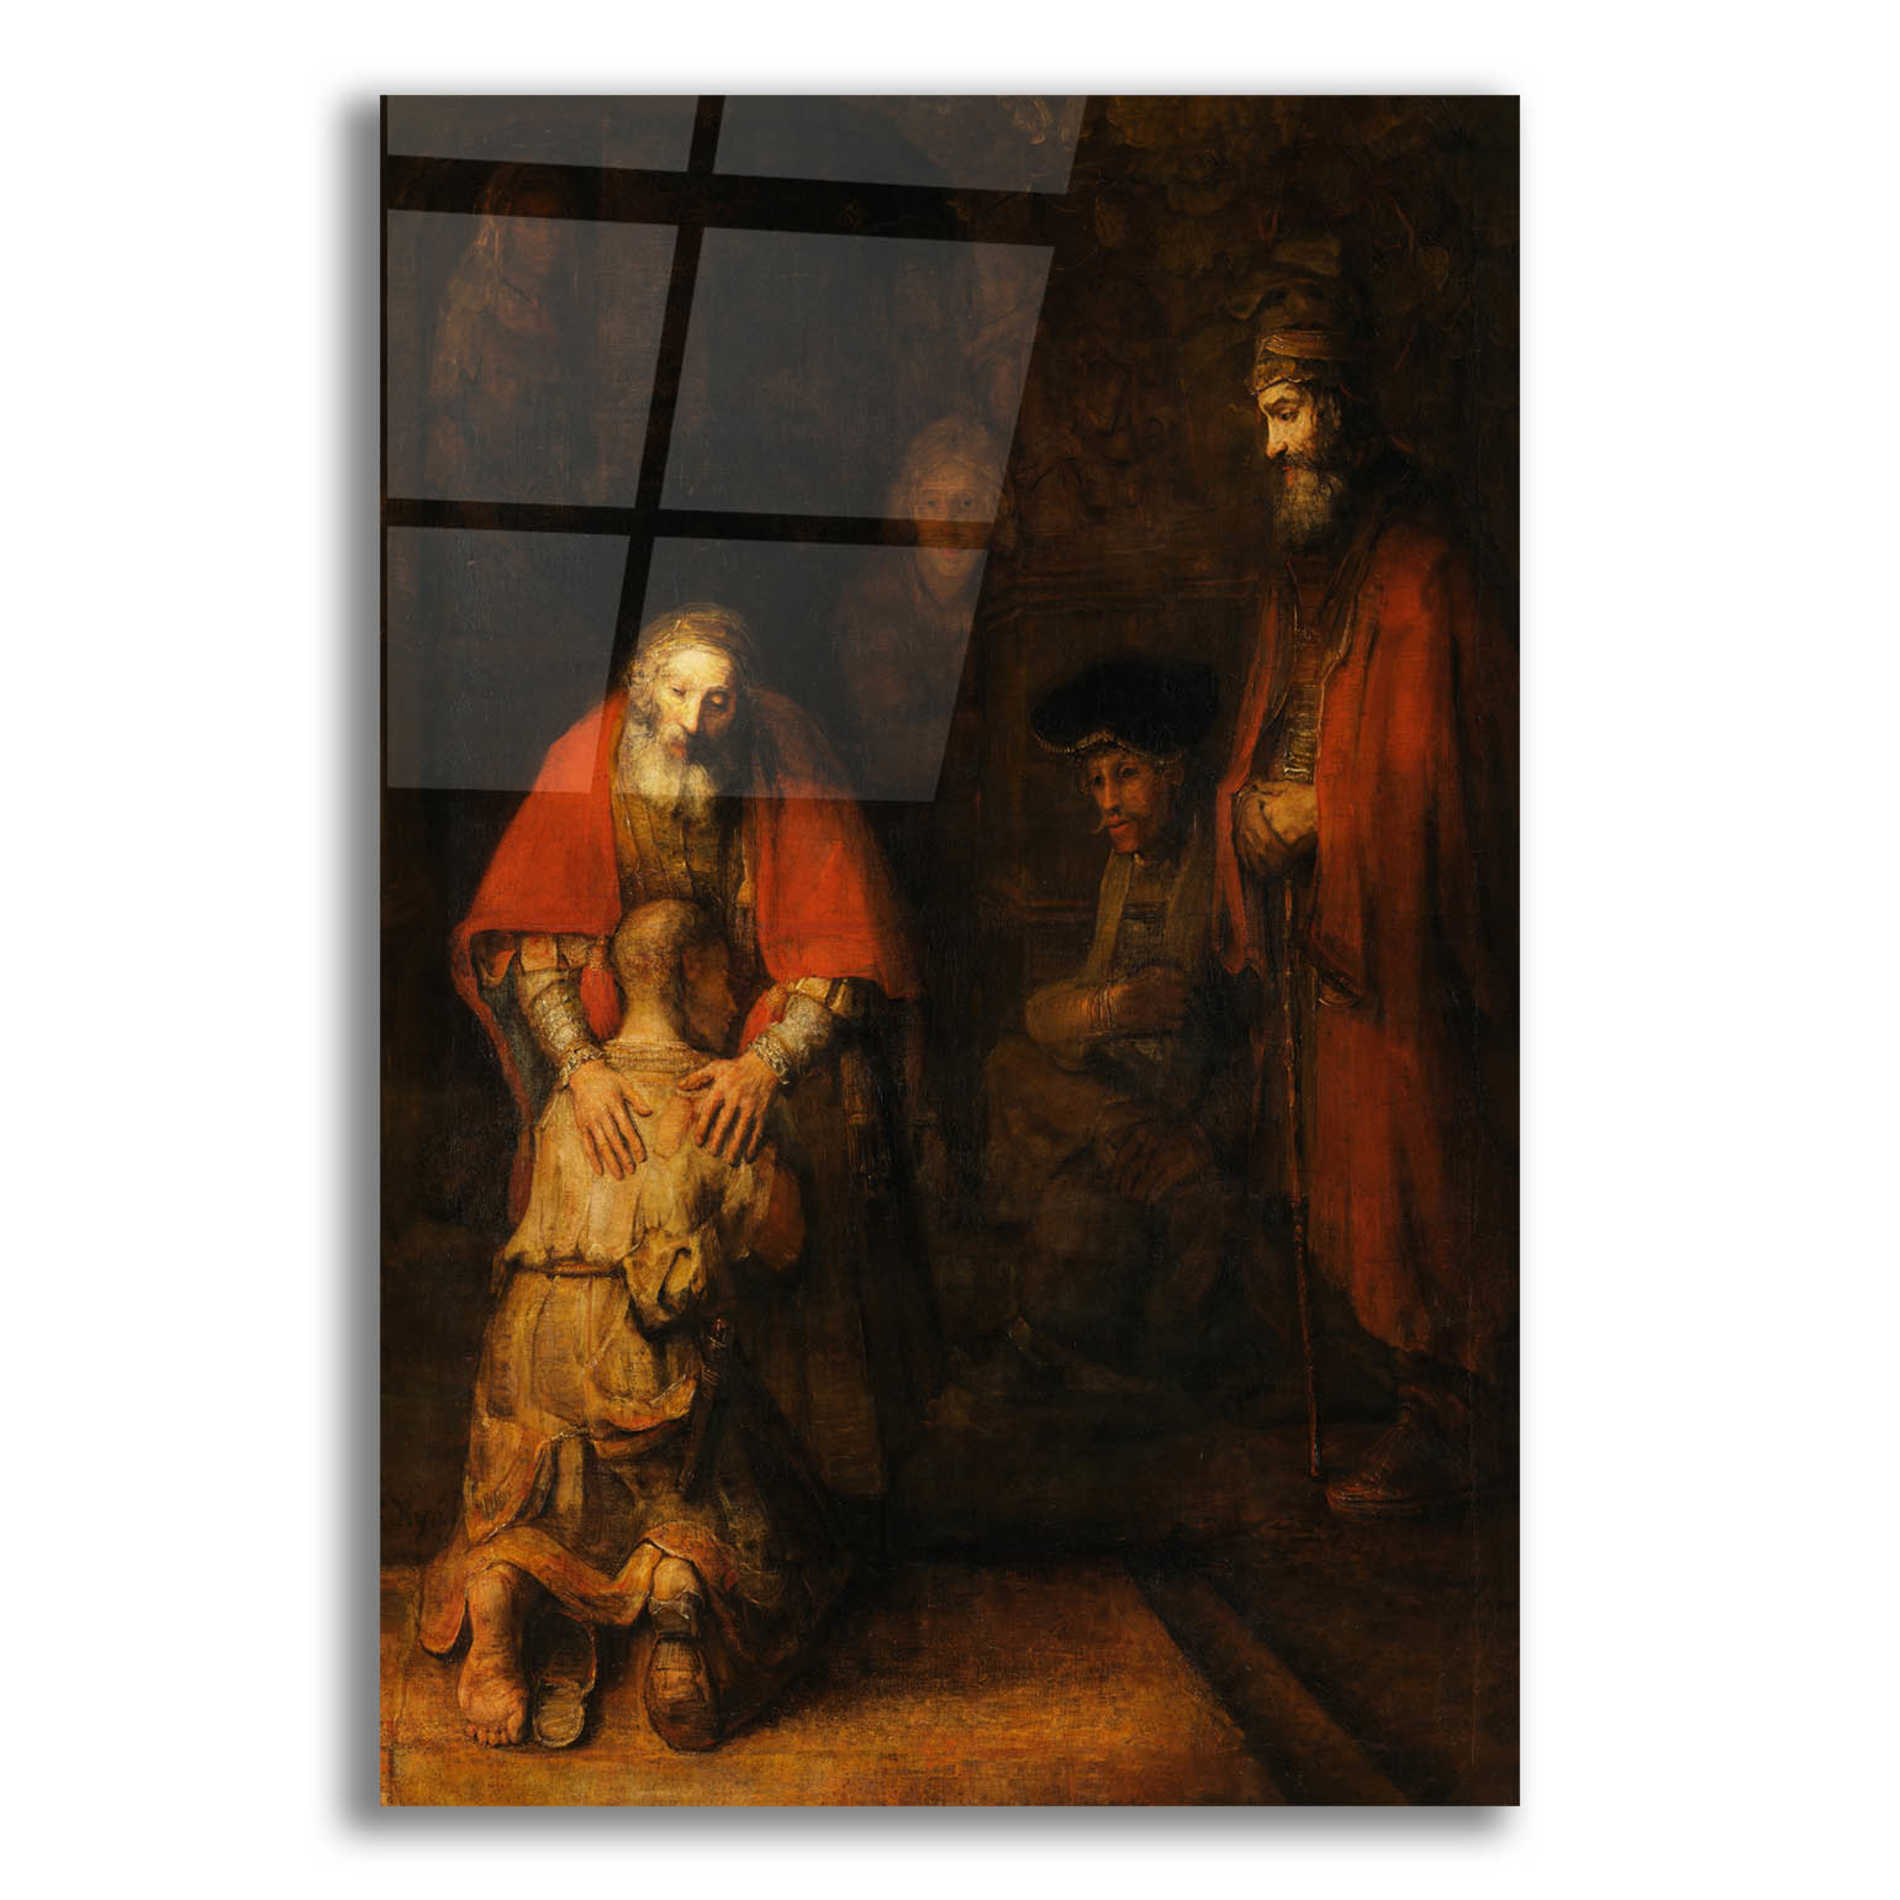 Epic Art 'The Return of the Prodigal Son' by Rembrandt, Acrylic Glass Wall Art,12x16